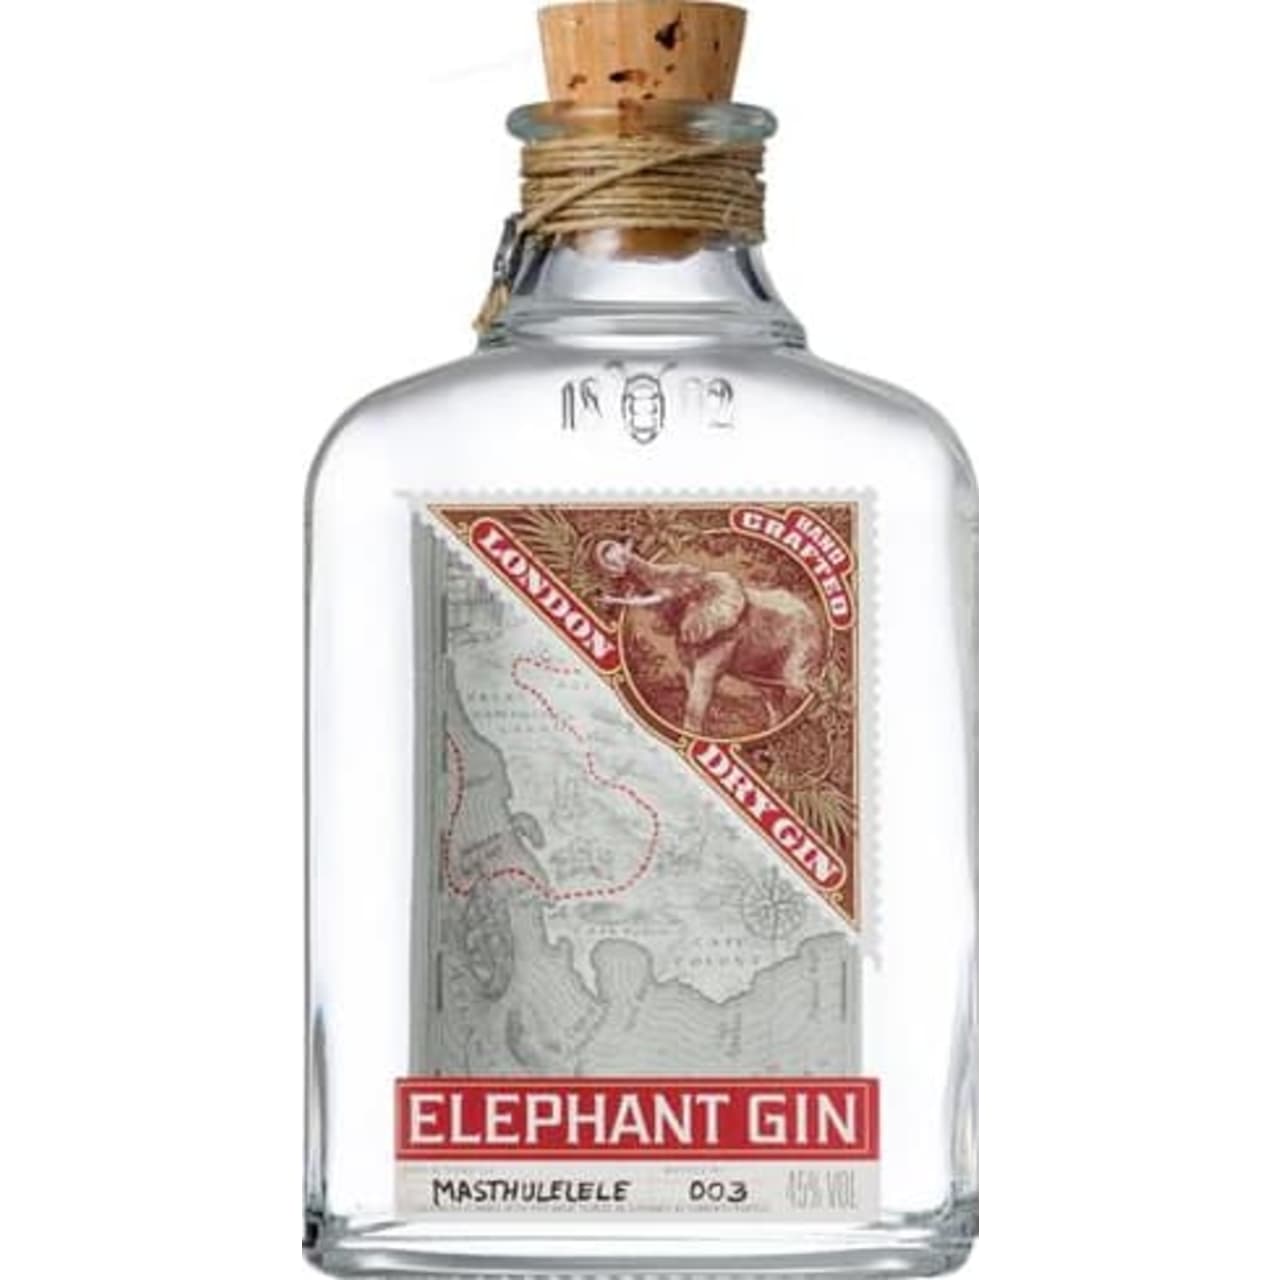 Elephant Gin uses 14 botanicals including African fruits and herbs. The gin's distinct nose first yields a subtle juniper aroma, with an undertone of mountain pine and other herbaceous notes. A complex but strikingly smooth palate, encompassing floral, fruity and spicy flavours.